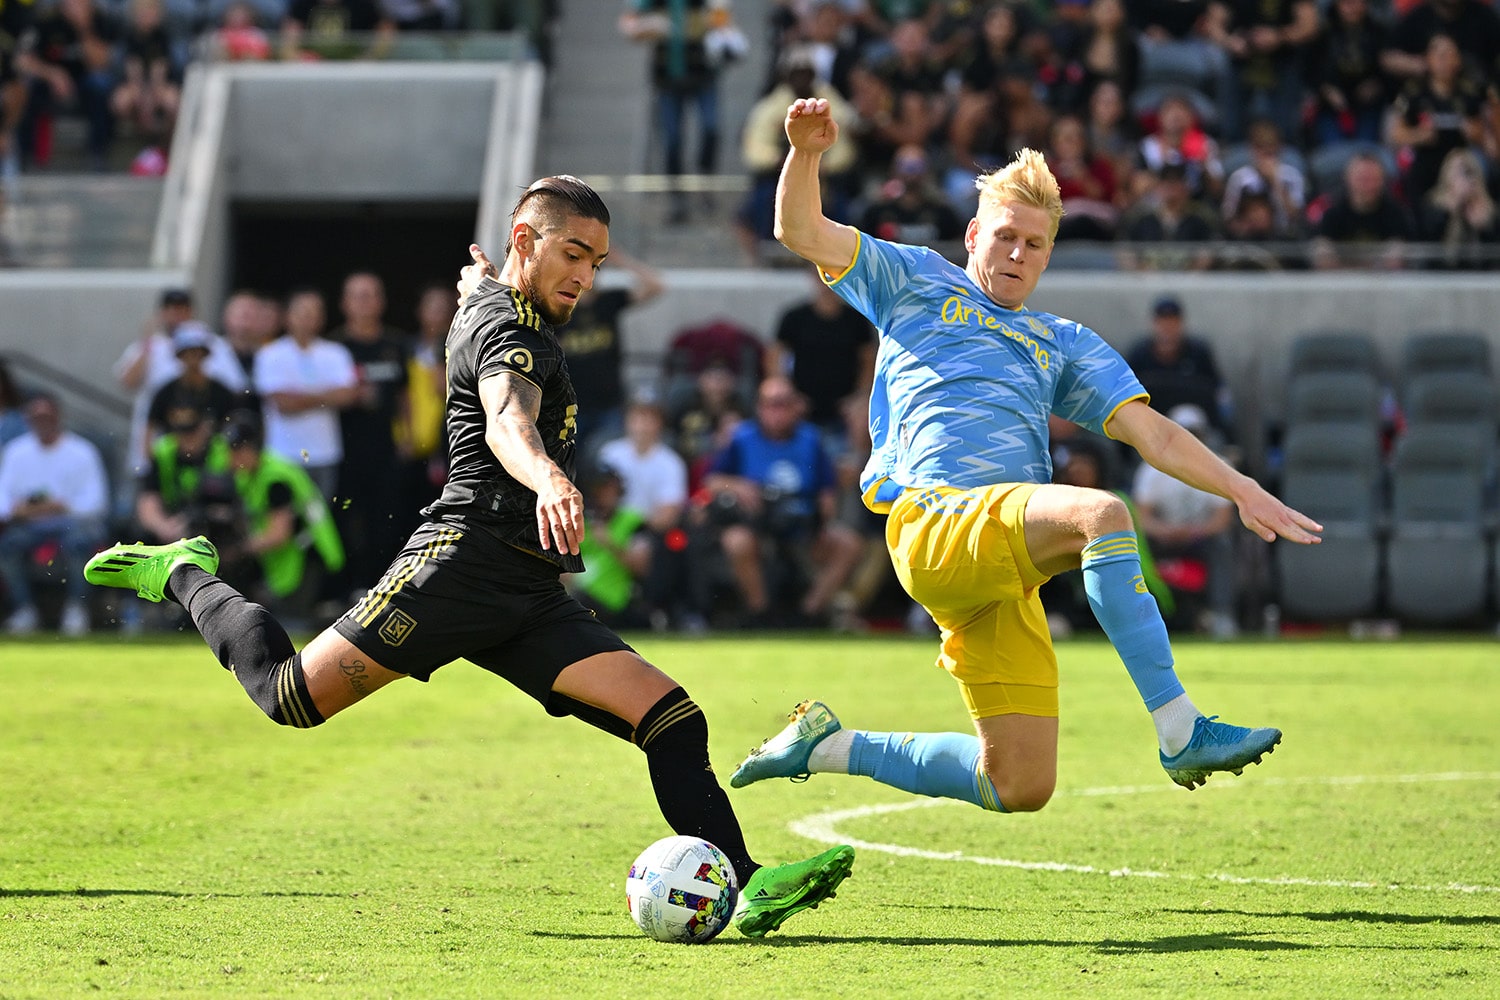 A player for the LAFC goes to strike the ball against a player for the Philadelphia Union during the 2022 MLS Cup Championship game.